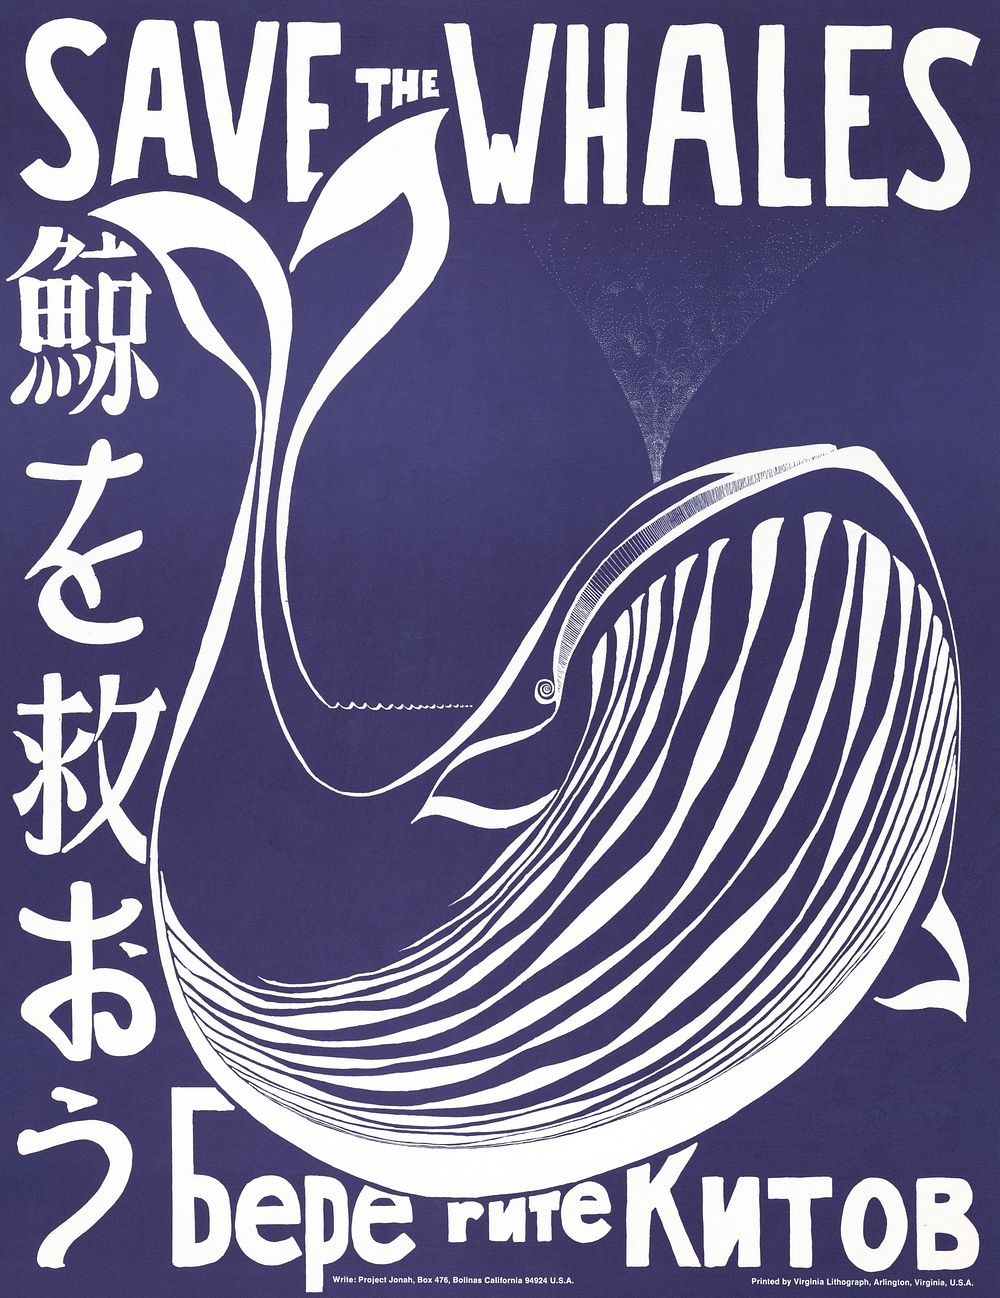 Save the whales (1973) vintage poster by Vint Lawrence. Original public domain image from the Library of Congress. Digitally…